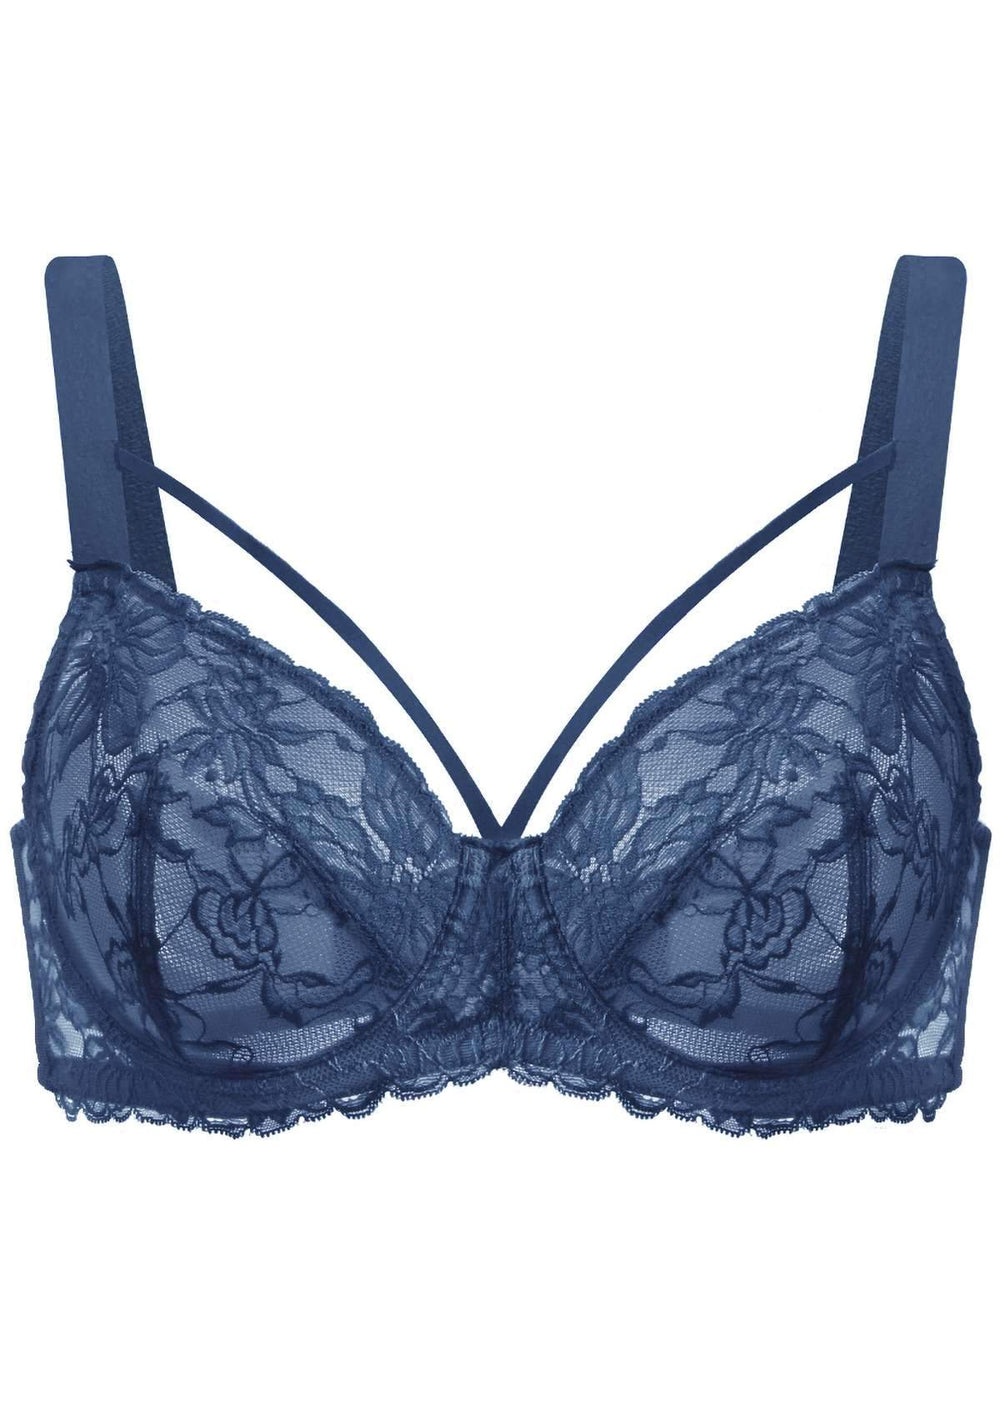 New Look Navy Lace Strappy Bralette with Chest-Neck Detail, Women's size 34B/C